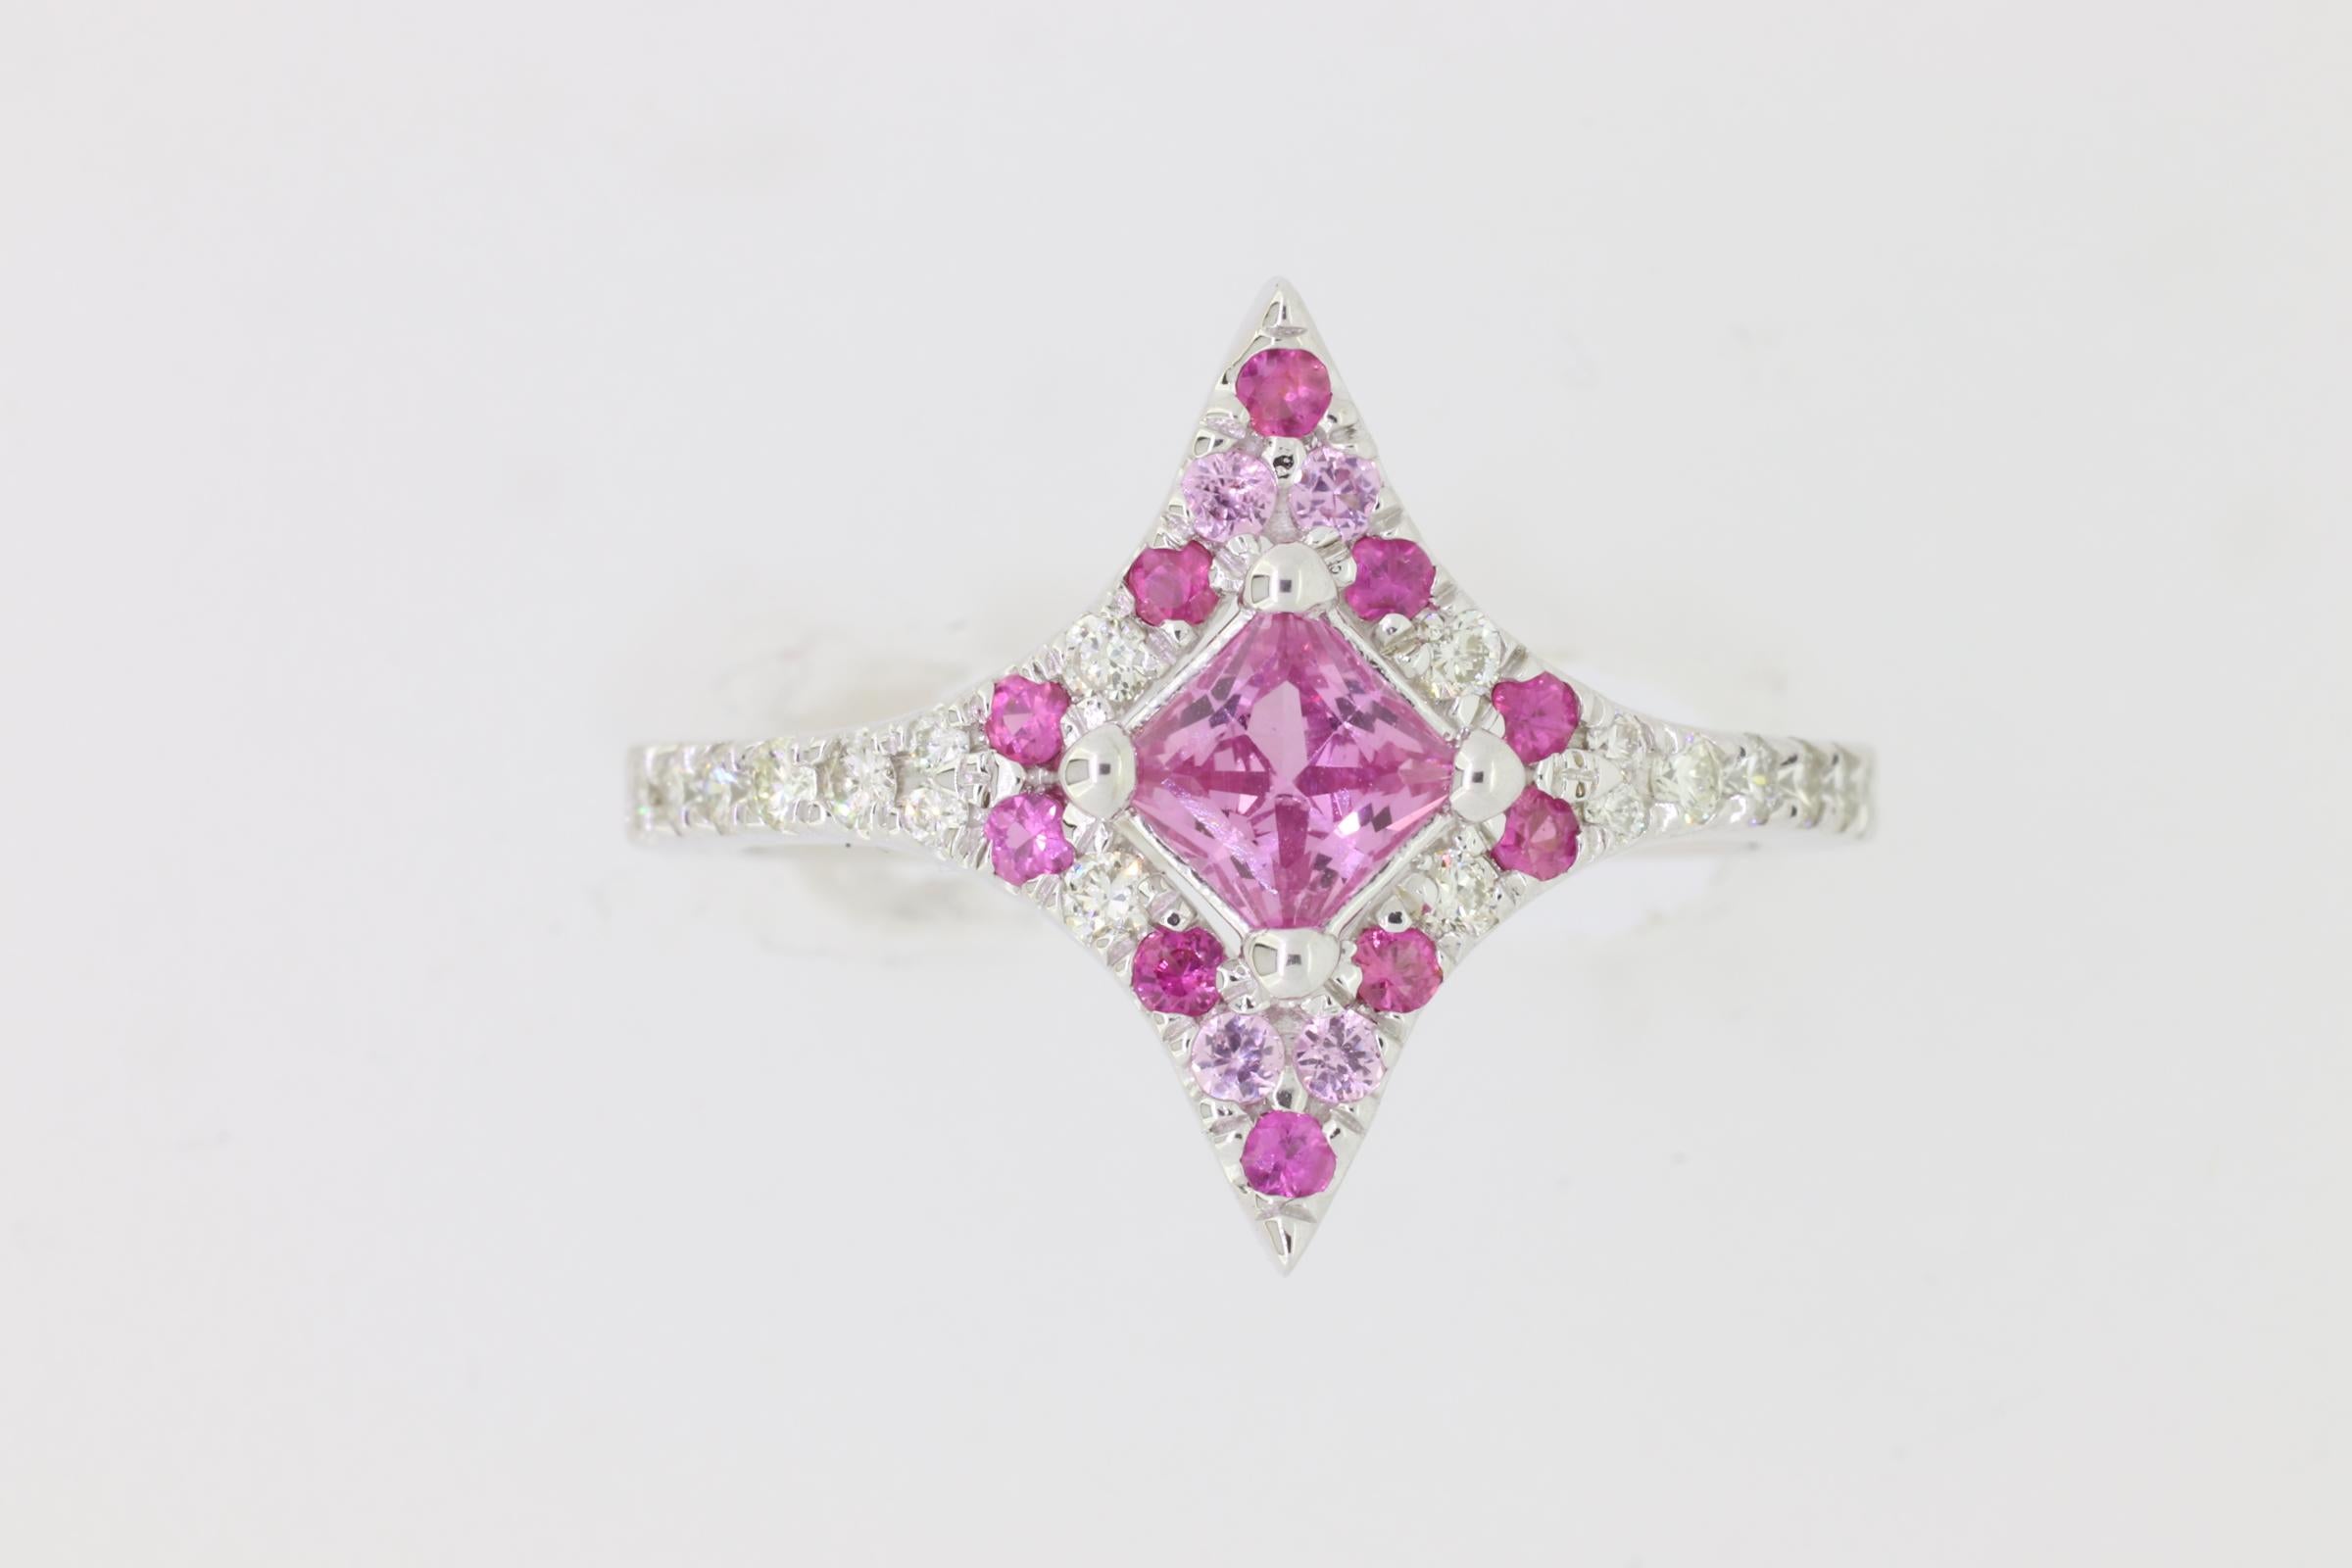 Material: 14k White Gold 
Center Stone Details: 1 Princess Cut Pink Sapphire at 0.75 Carats- Measuring 4.5 mm
Mounting Stone Details: 17 Multicolor Sapphires at 0.38 Carats
Diamond Details: 15 Round White Diamonds at 0.26 Carats - Clarity: SI /